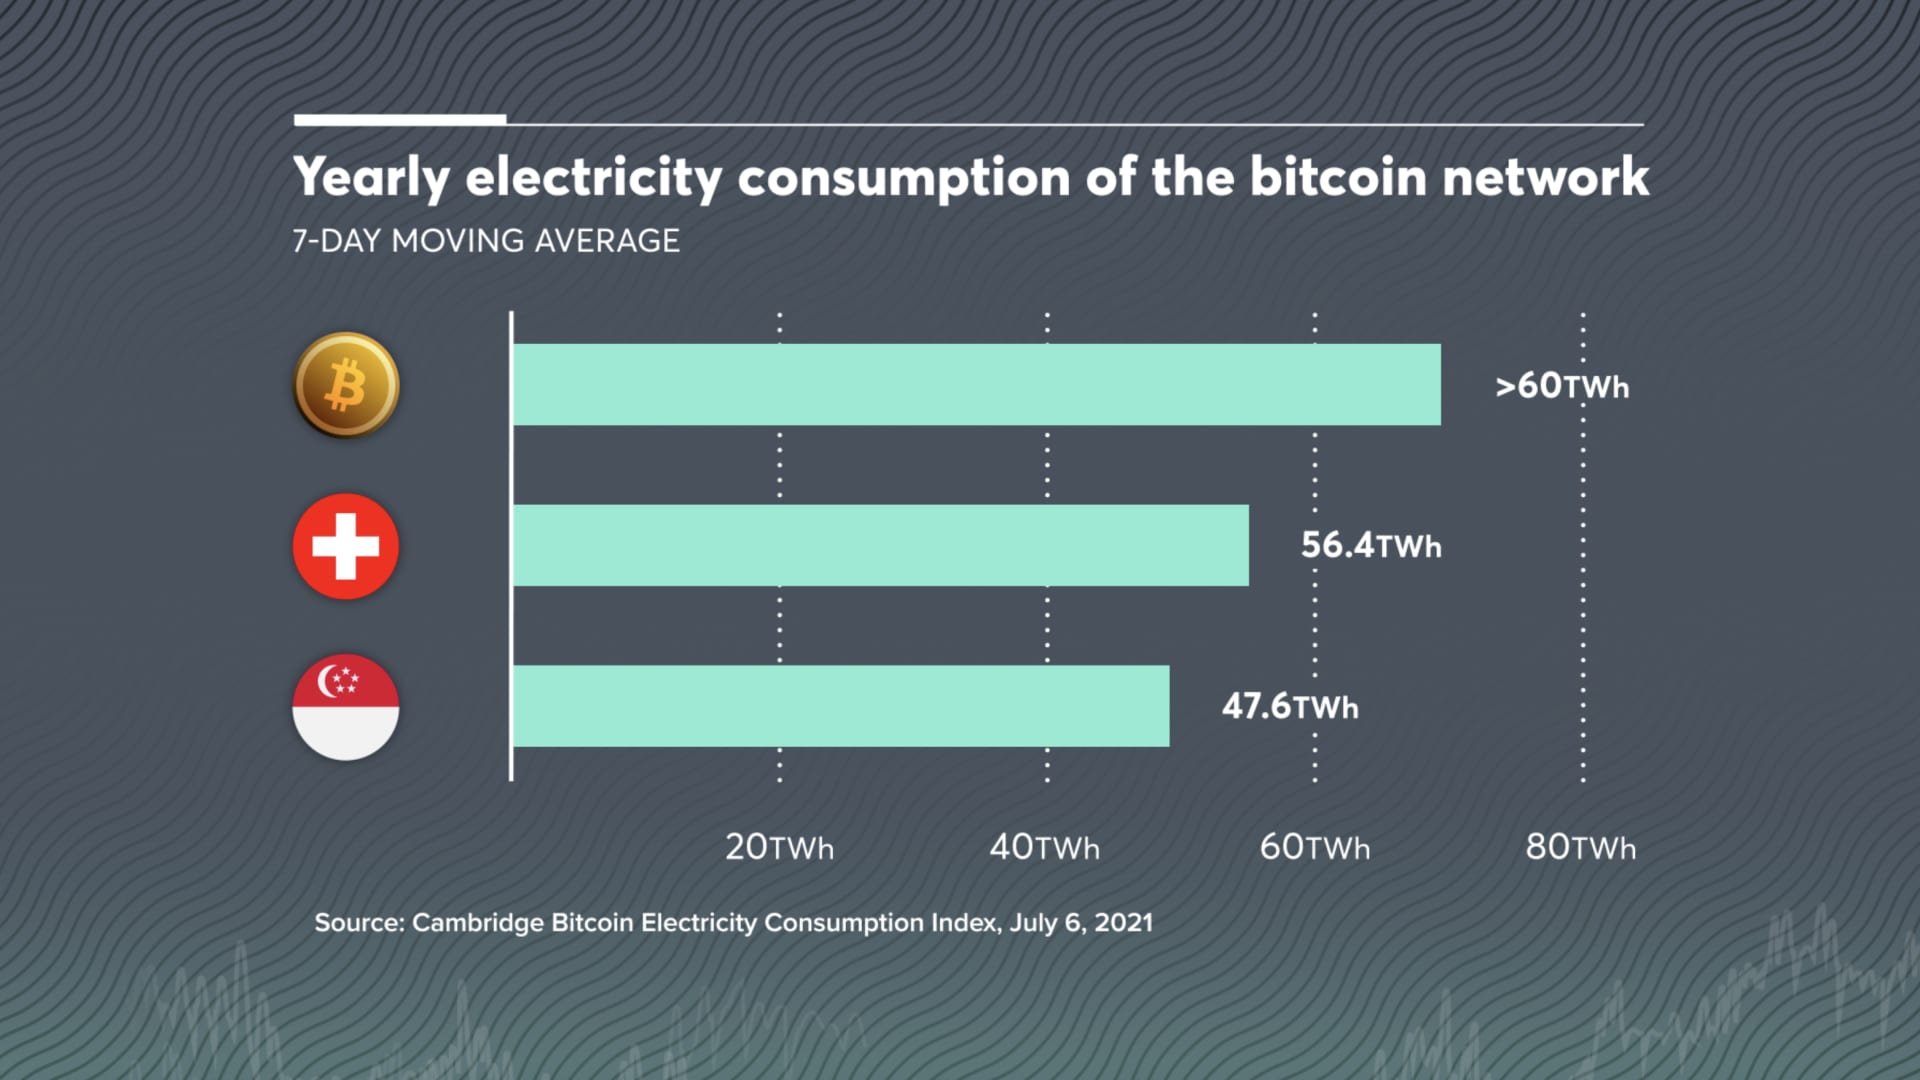 The annual electricity consumption of bitcoin is more than countries such as Switzerland and Singapore.